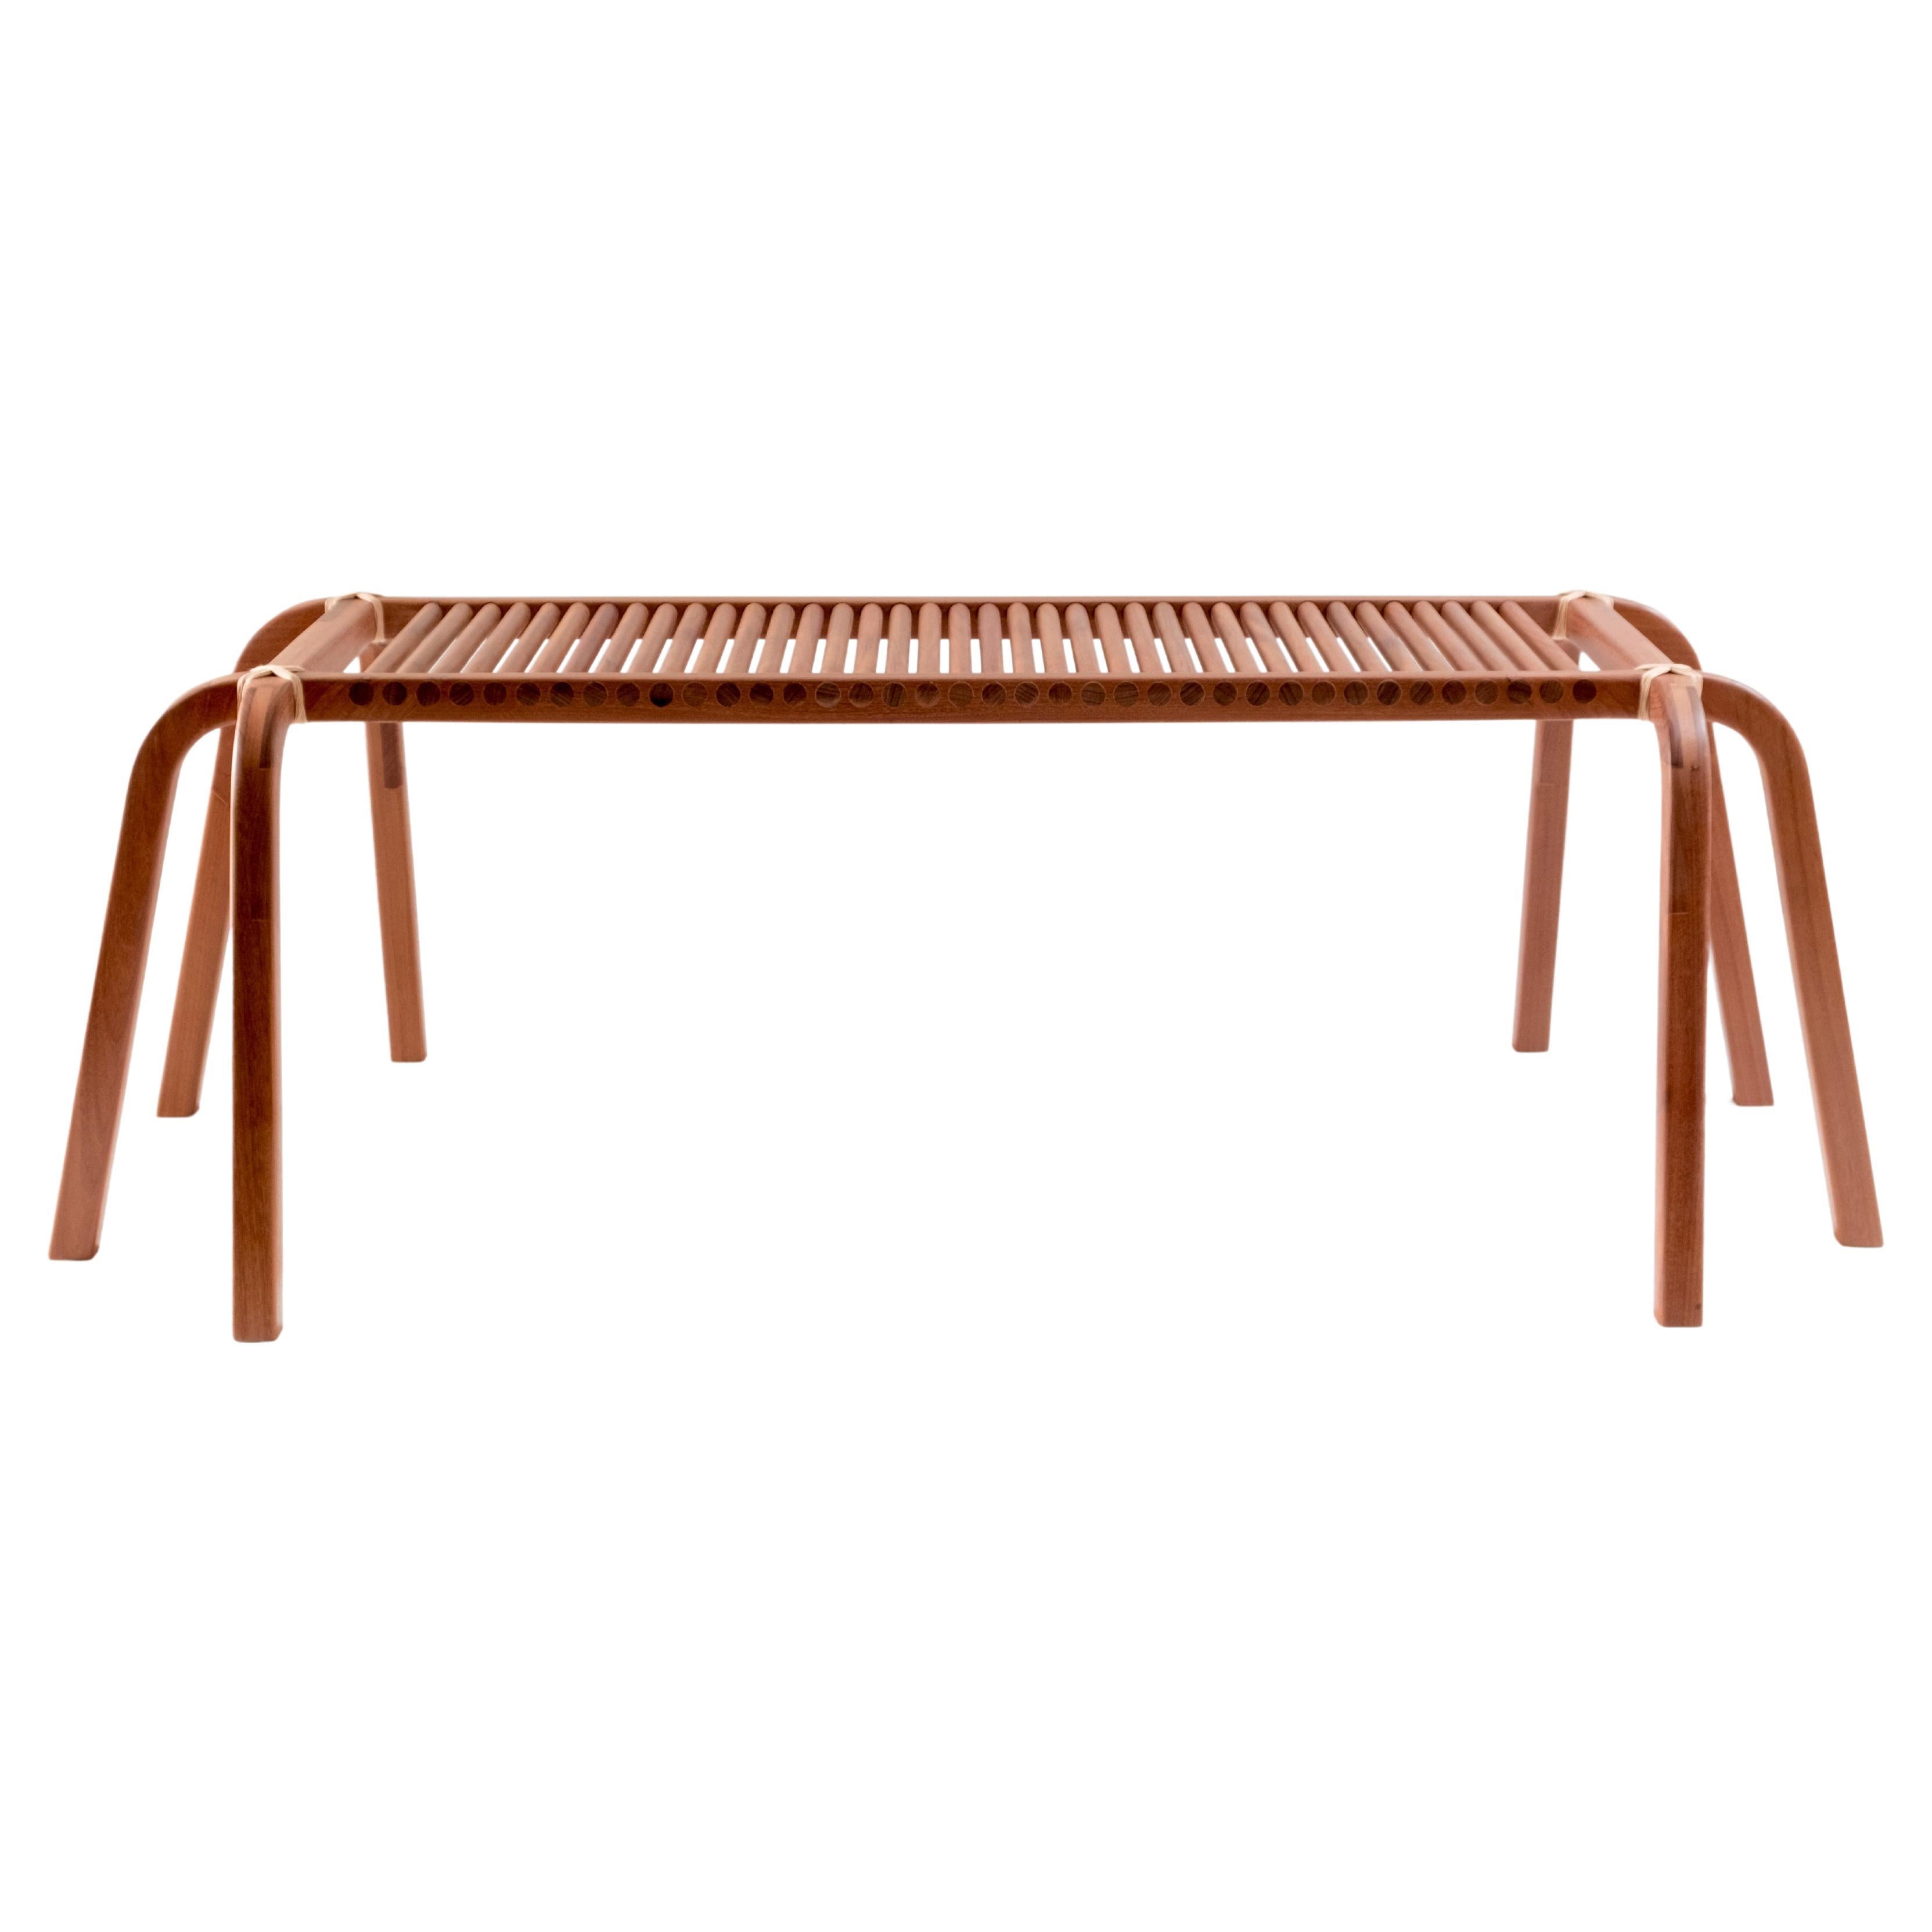 Embira Bench: made in Brazil with pink jequitba wood and natural dyed yarns